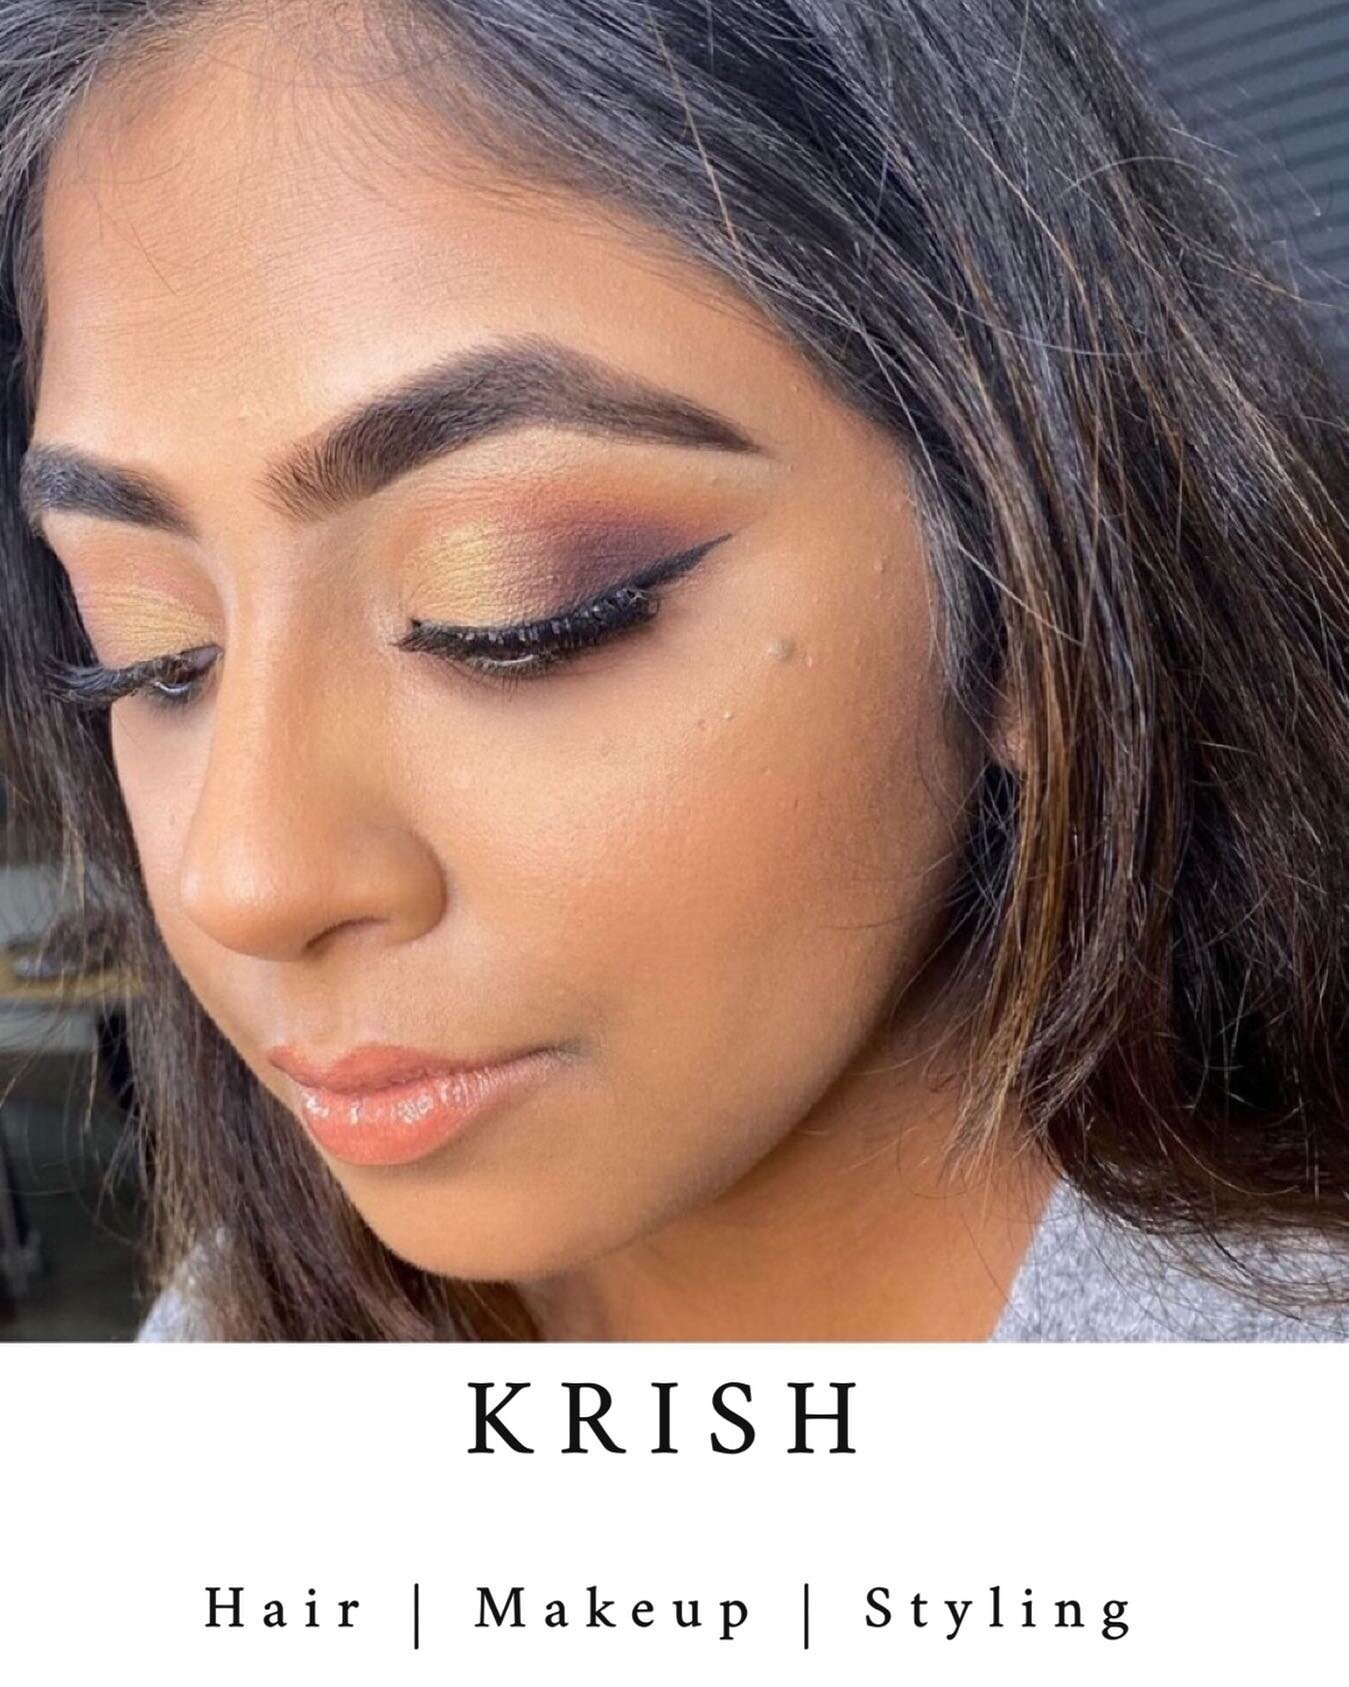 💄Stylist: KRISH 
📍Location: LEEDS - available to travel ----------------------------------------------------------------------------------
To BOOK 👉🏽 Email us at promakeuplondonstylists@gmail.com --------------------------------------------------